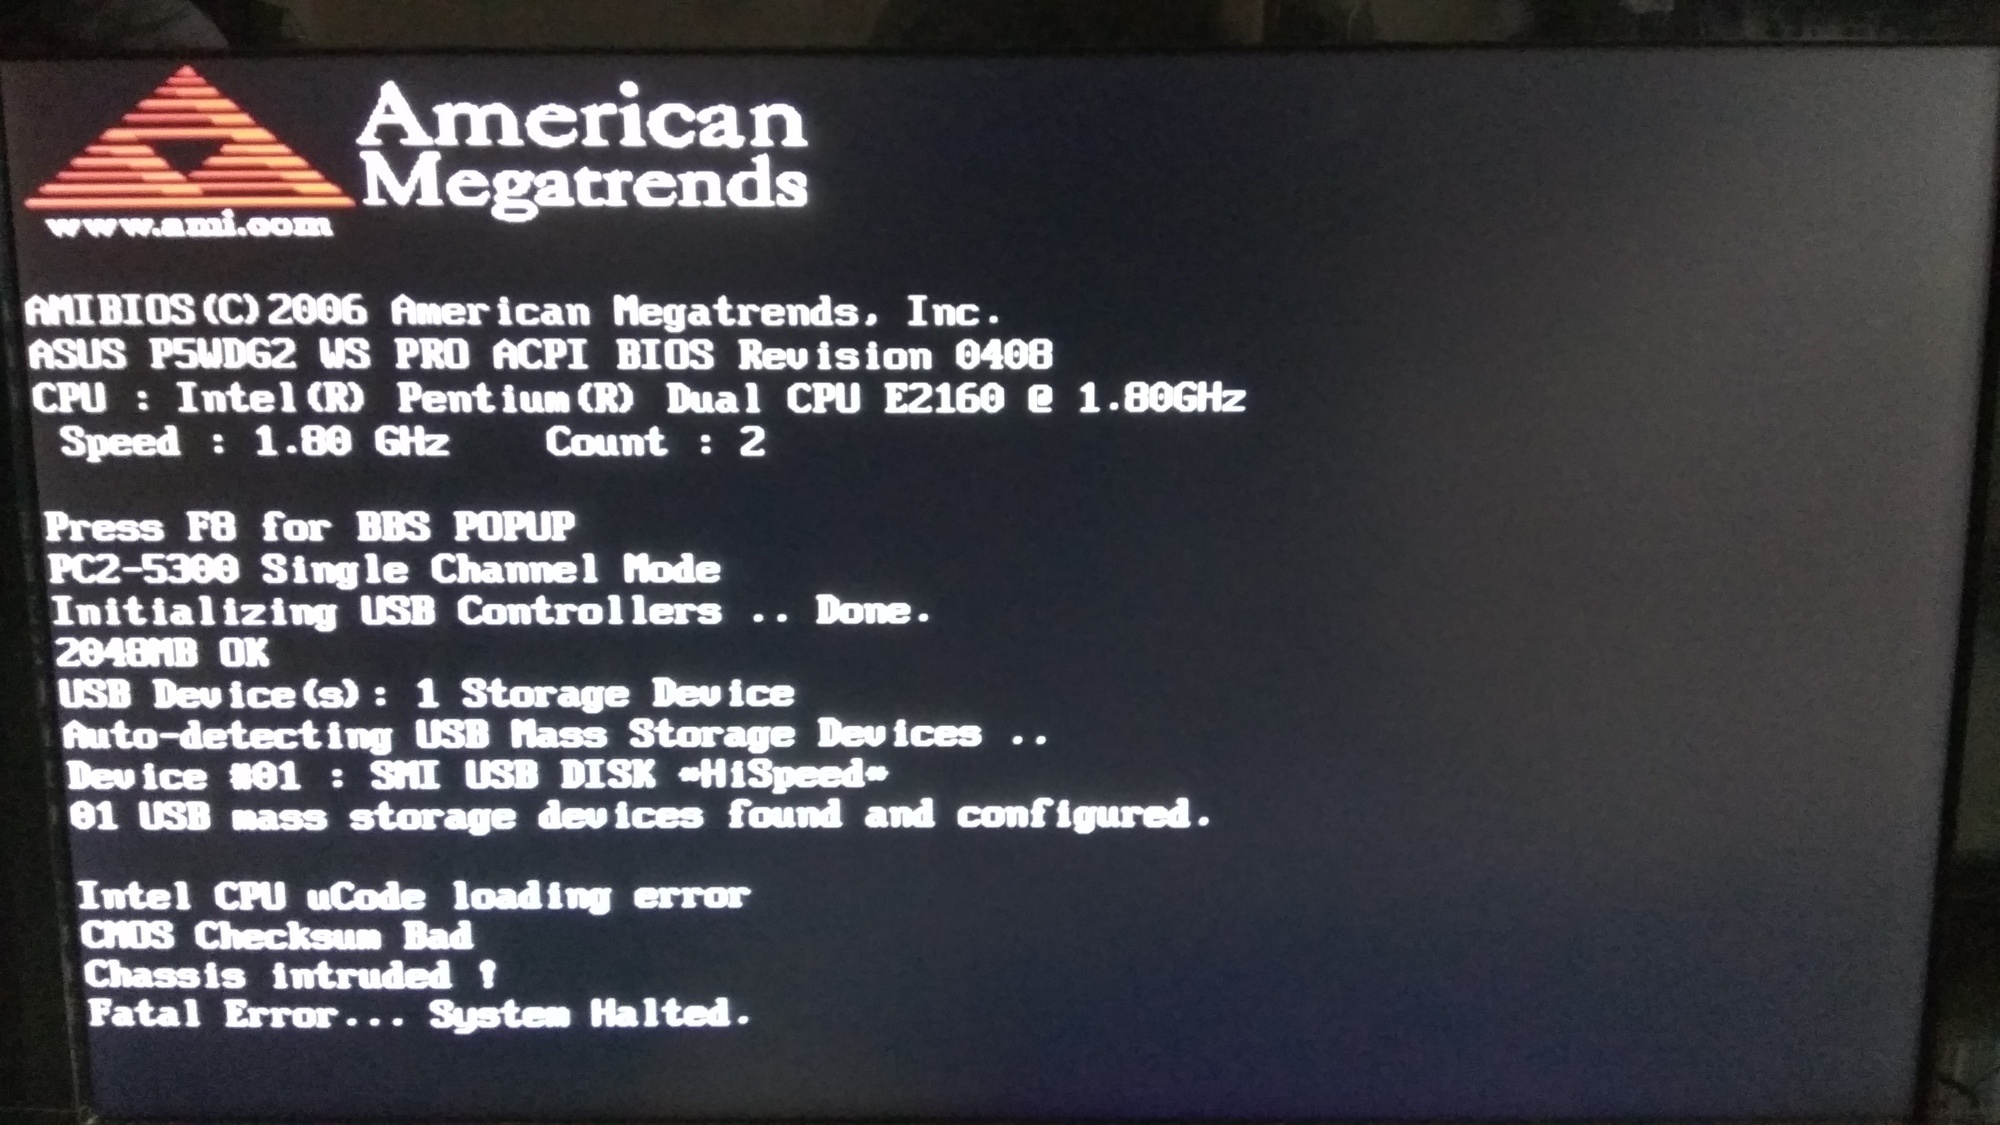 TPM chassis intruded error message from an AMI BIOS